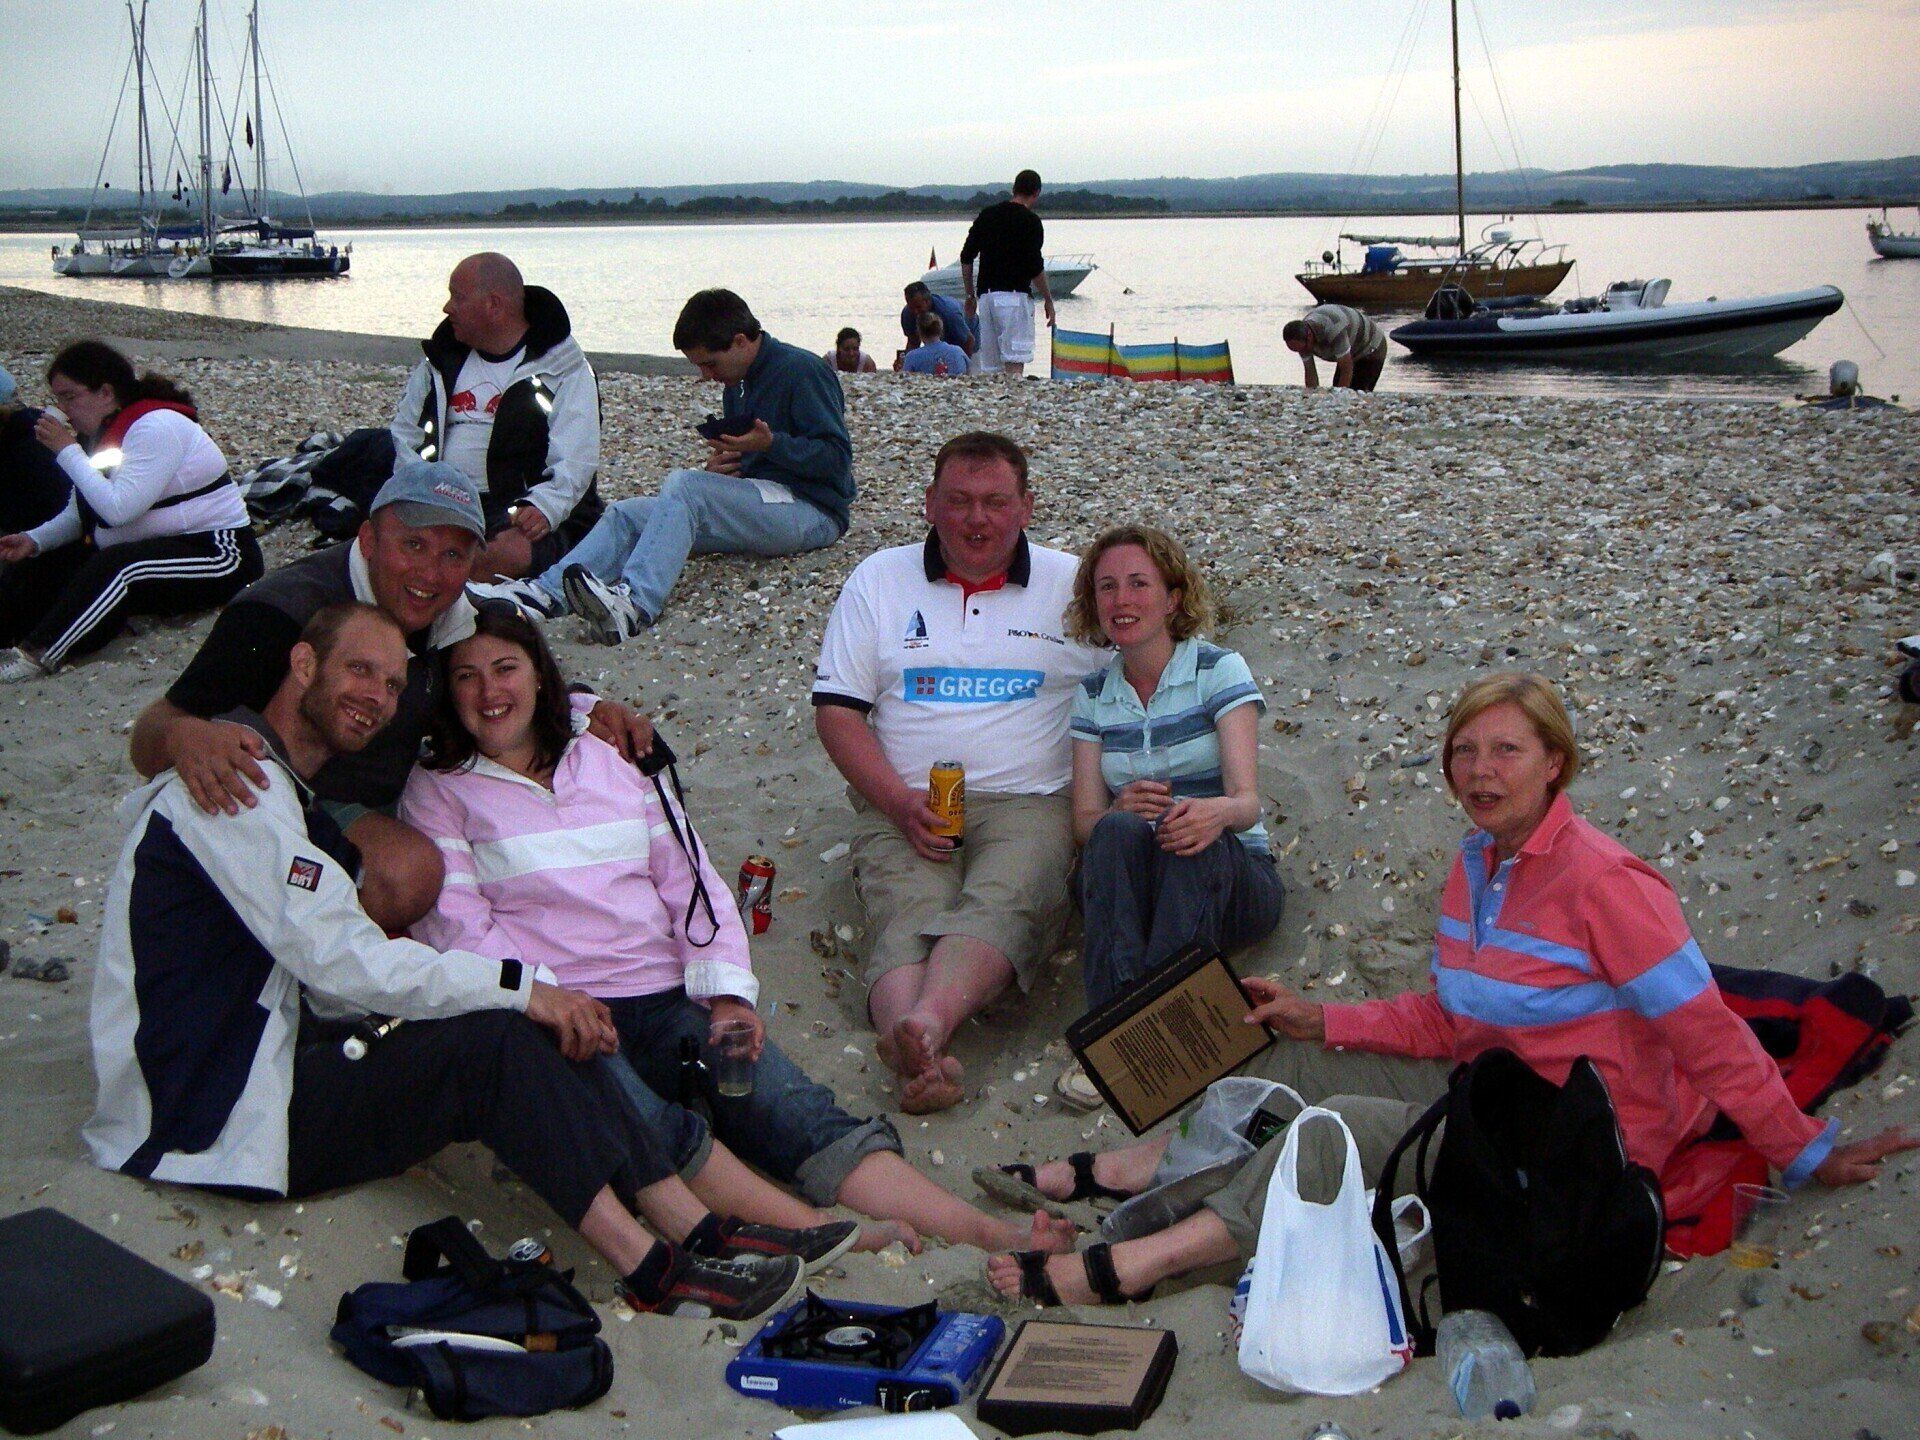 A group of sighted and visually-impaired sailors are sitting on a beach in the evening after a day's sailing. They've got food and drinks and are smiling at the camera. A group has their arms around each others' shoulders. The ocean and moored boats are in the background.